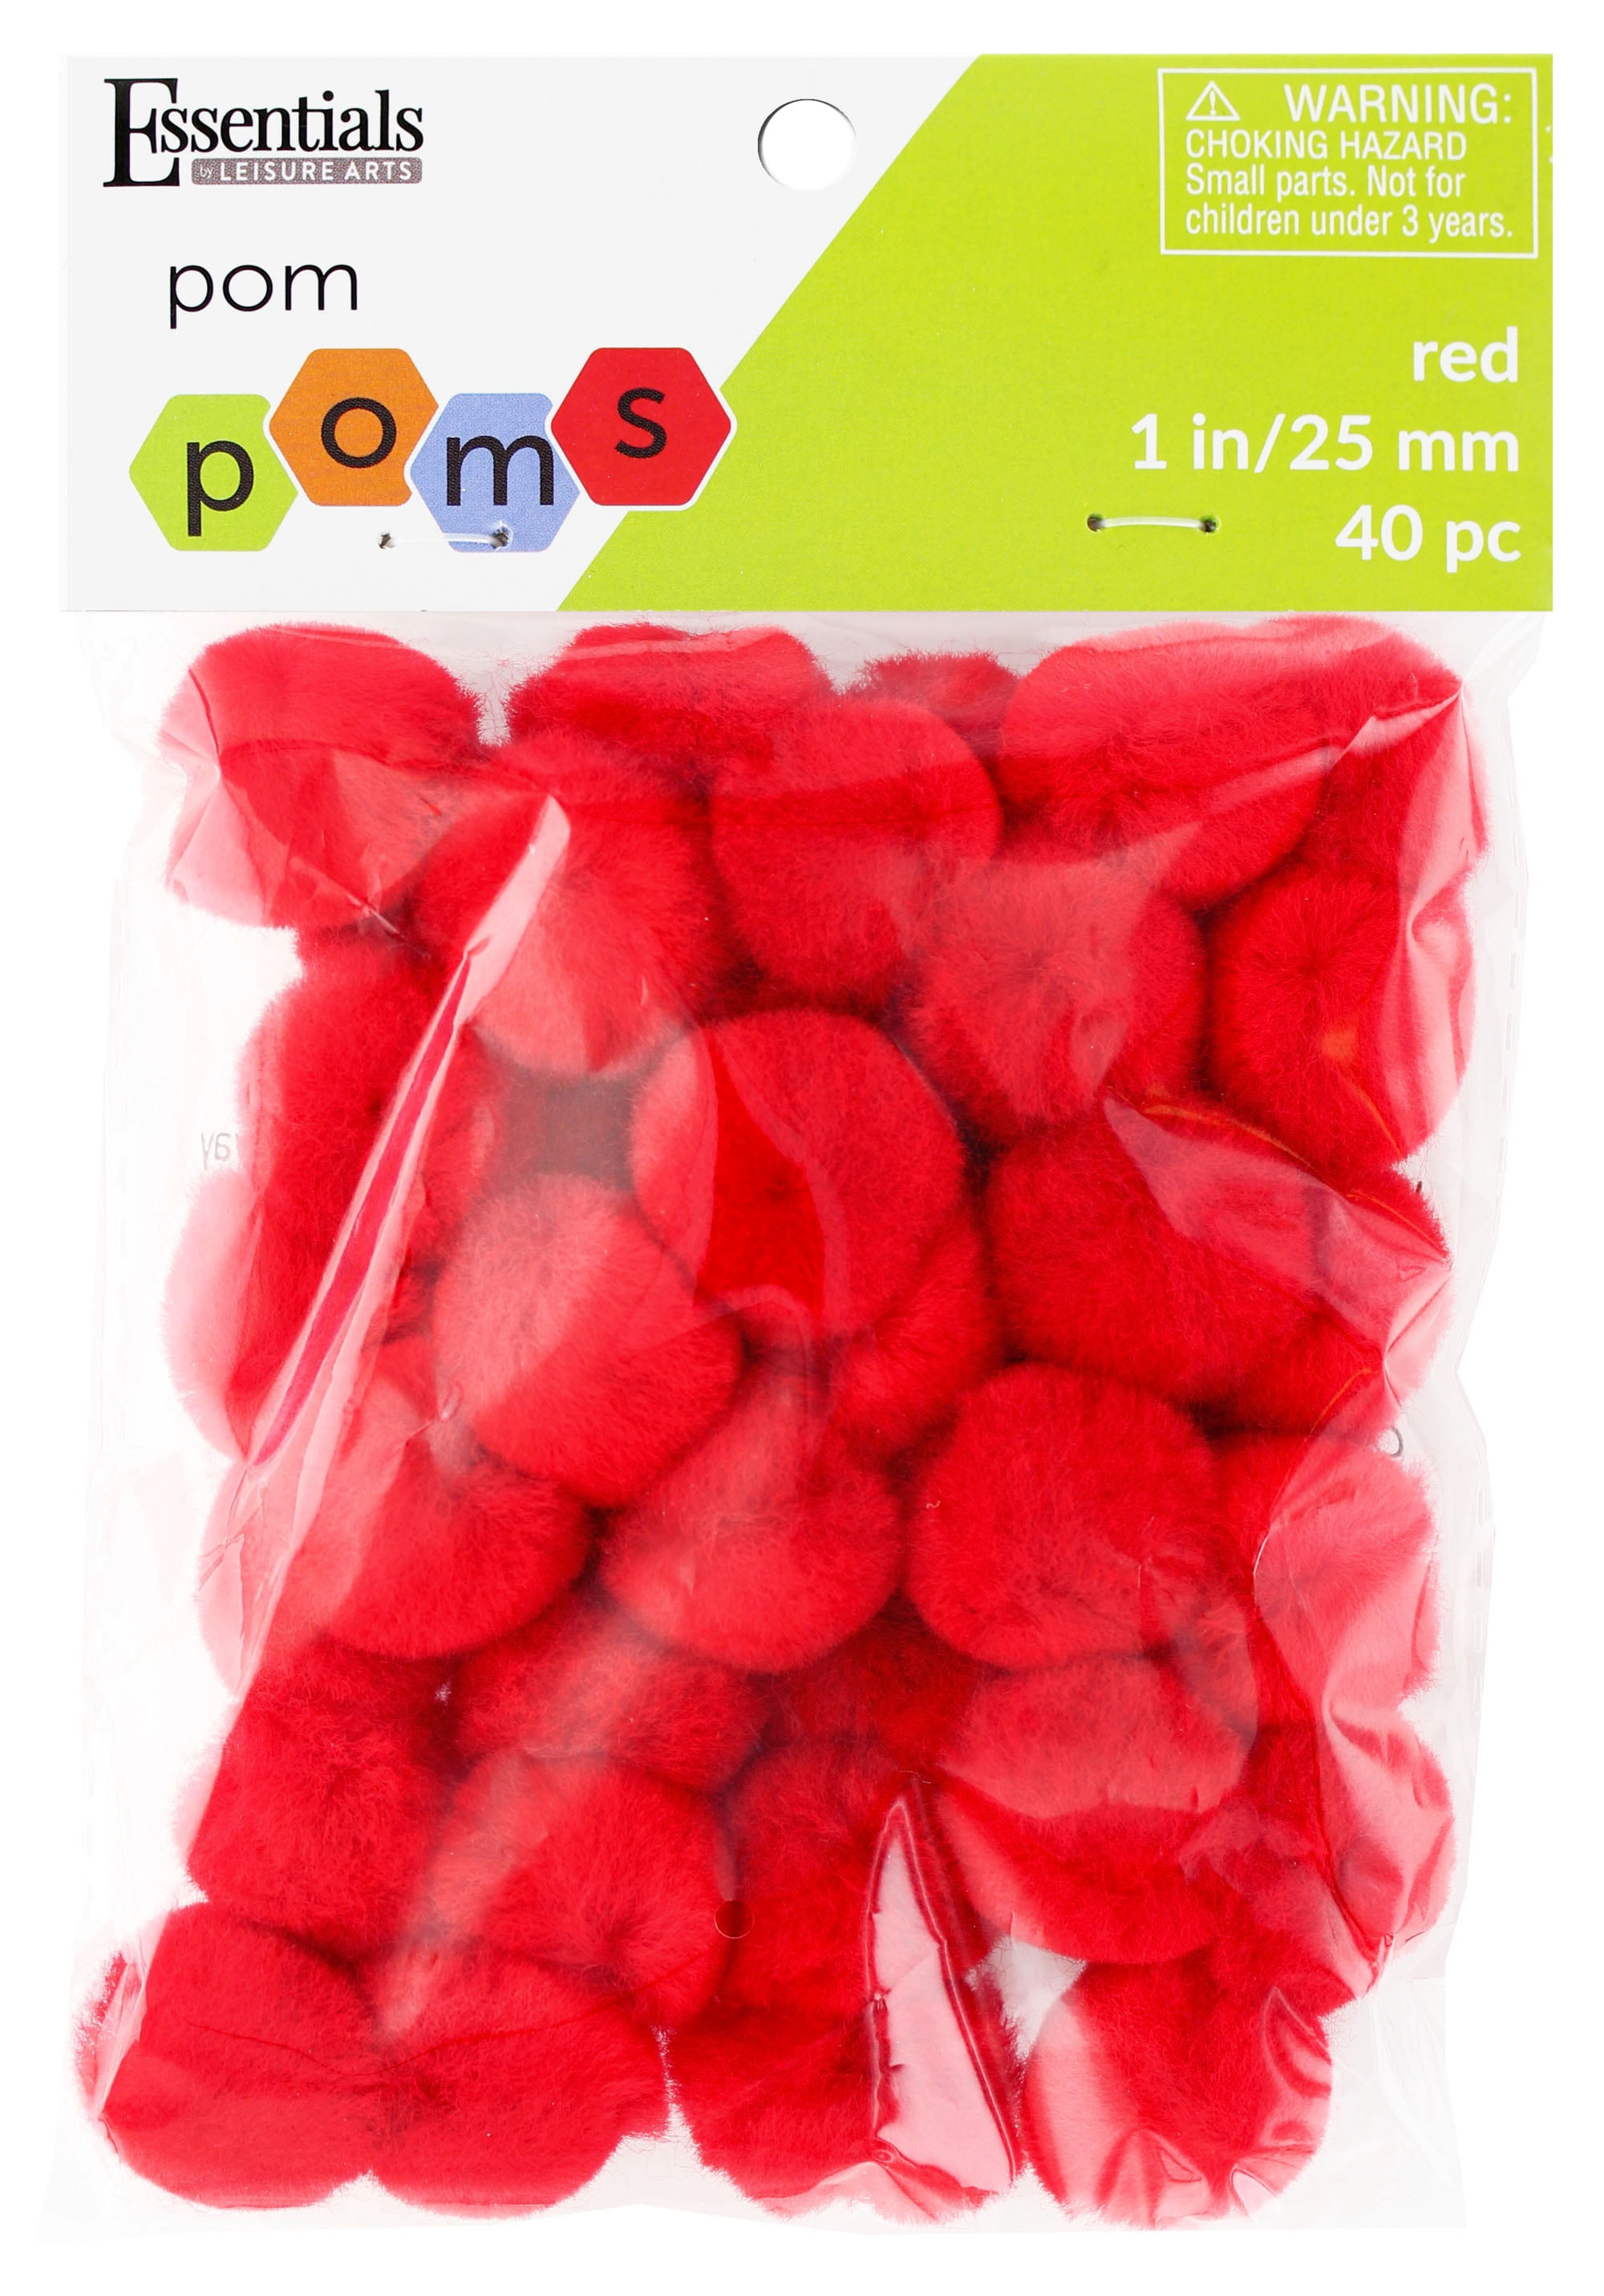 Essentials by Leisure Arts Pom Poms - Glitter Multi-colored - 1/2 - 20  piece pom poms arts and crafts - colored pompoms for crafts - craft pom poms  - puff balls for crafts 